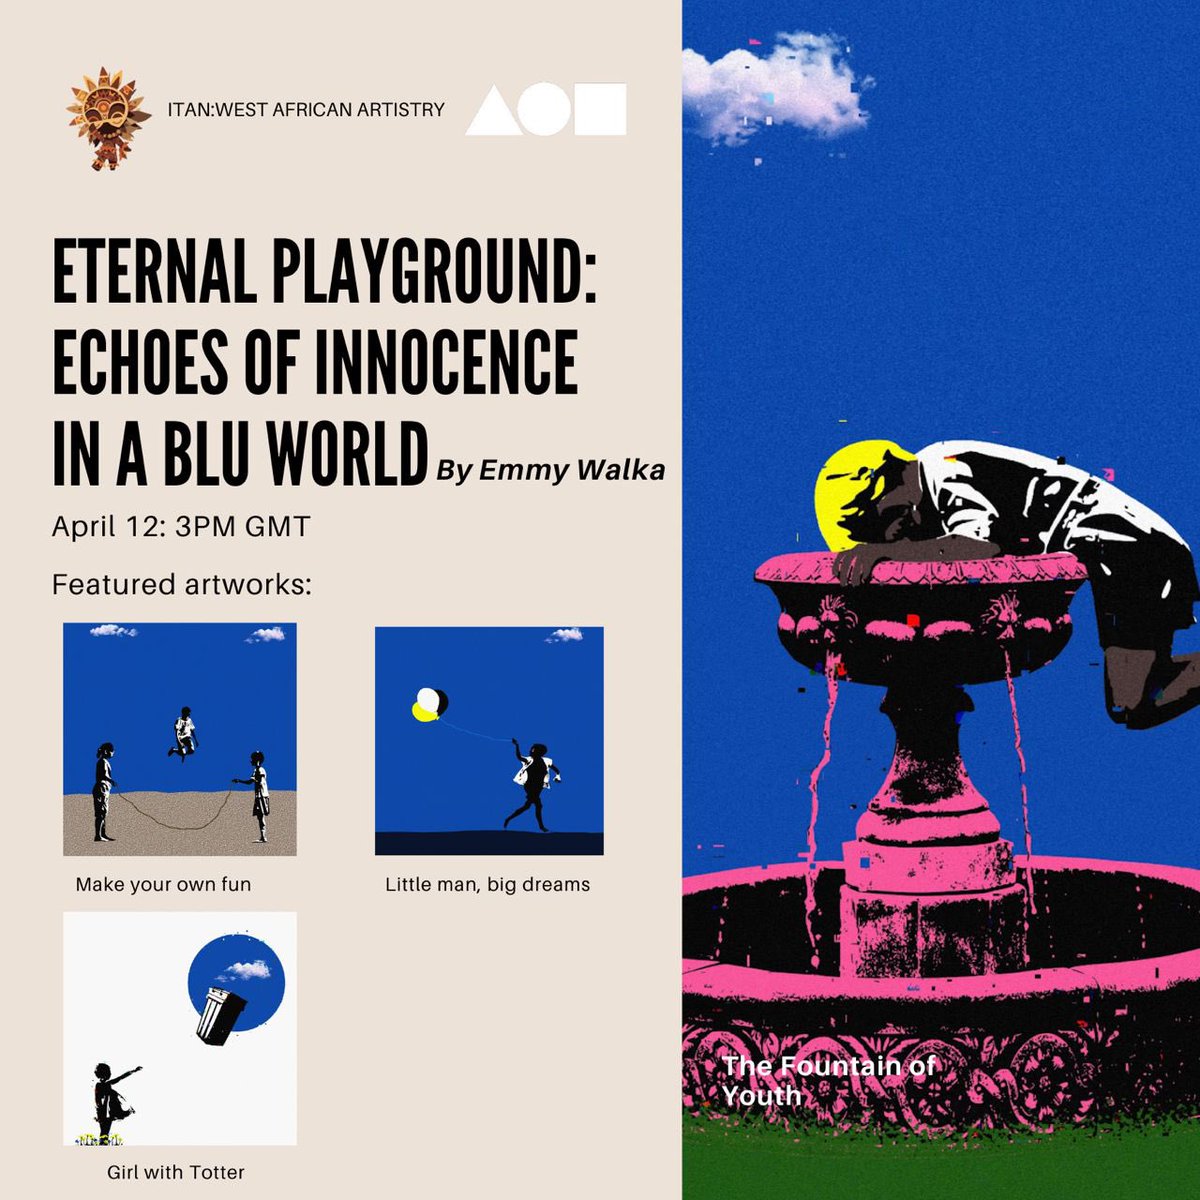 We are thrilled to present our latest digital solo exhibition on @foundation 🎉 “Eternal Playground: Echoes of Innocence in a Blu World” by @EmmyWalka curated by @juujuumama